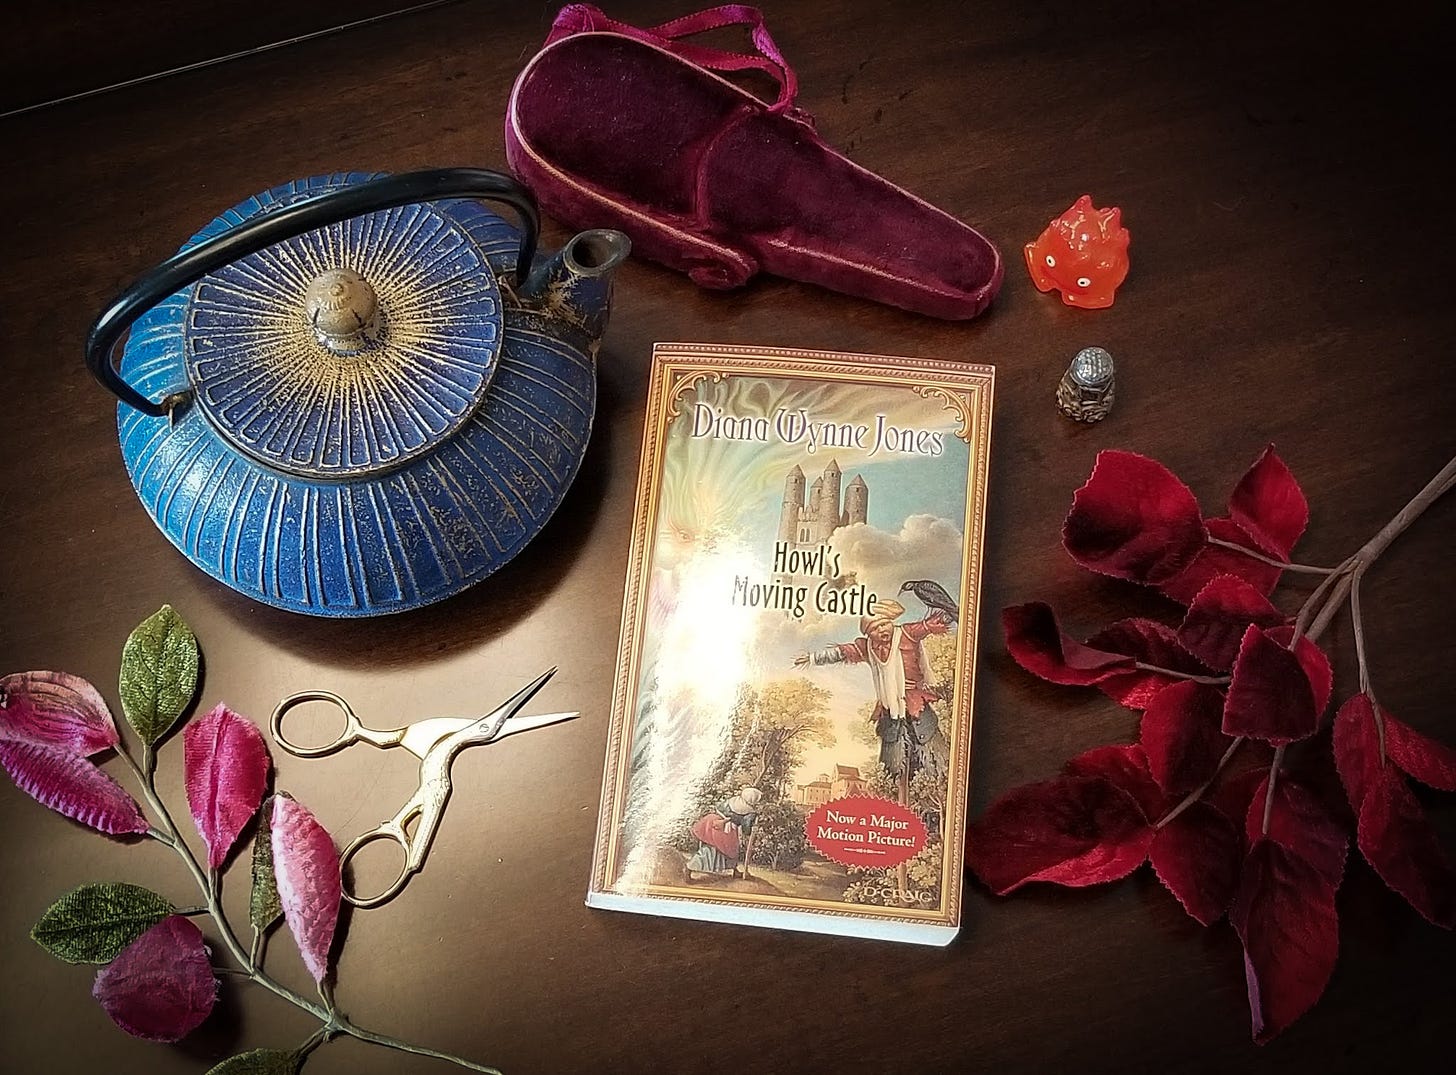 Book of Howl's Moving Castle by Diana Wynne Jones next to a blue teapot, velvet leaves, and small crane scissors.